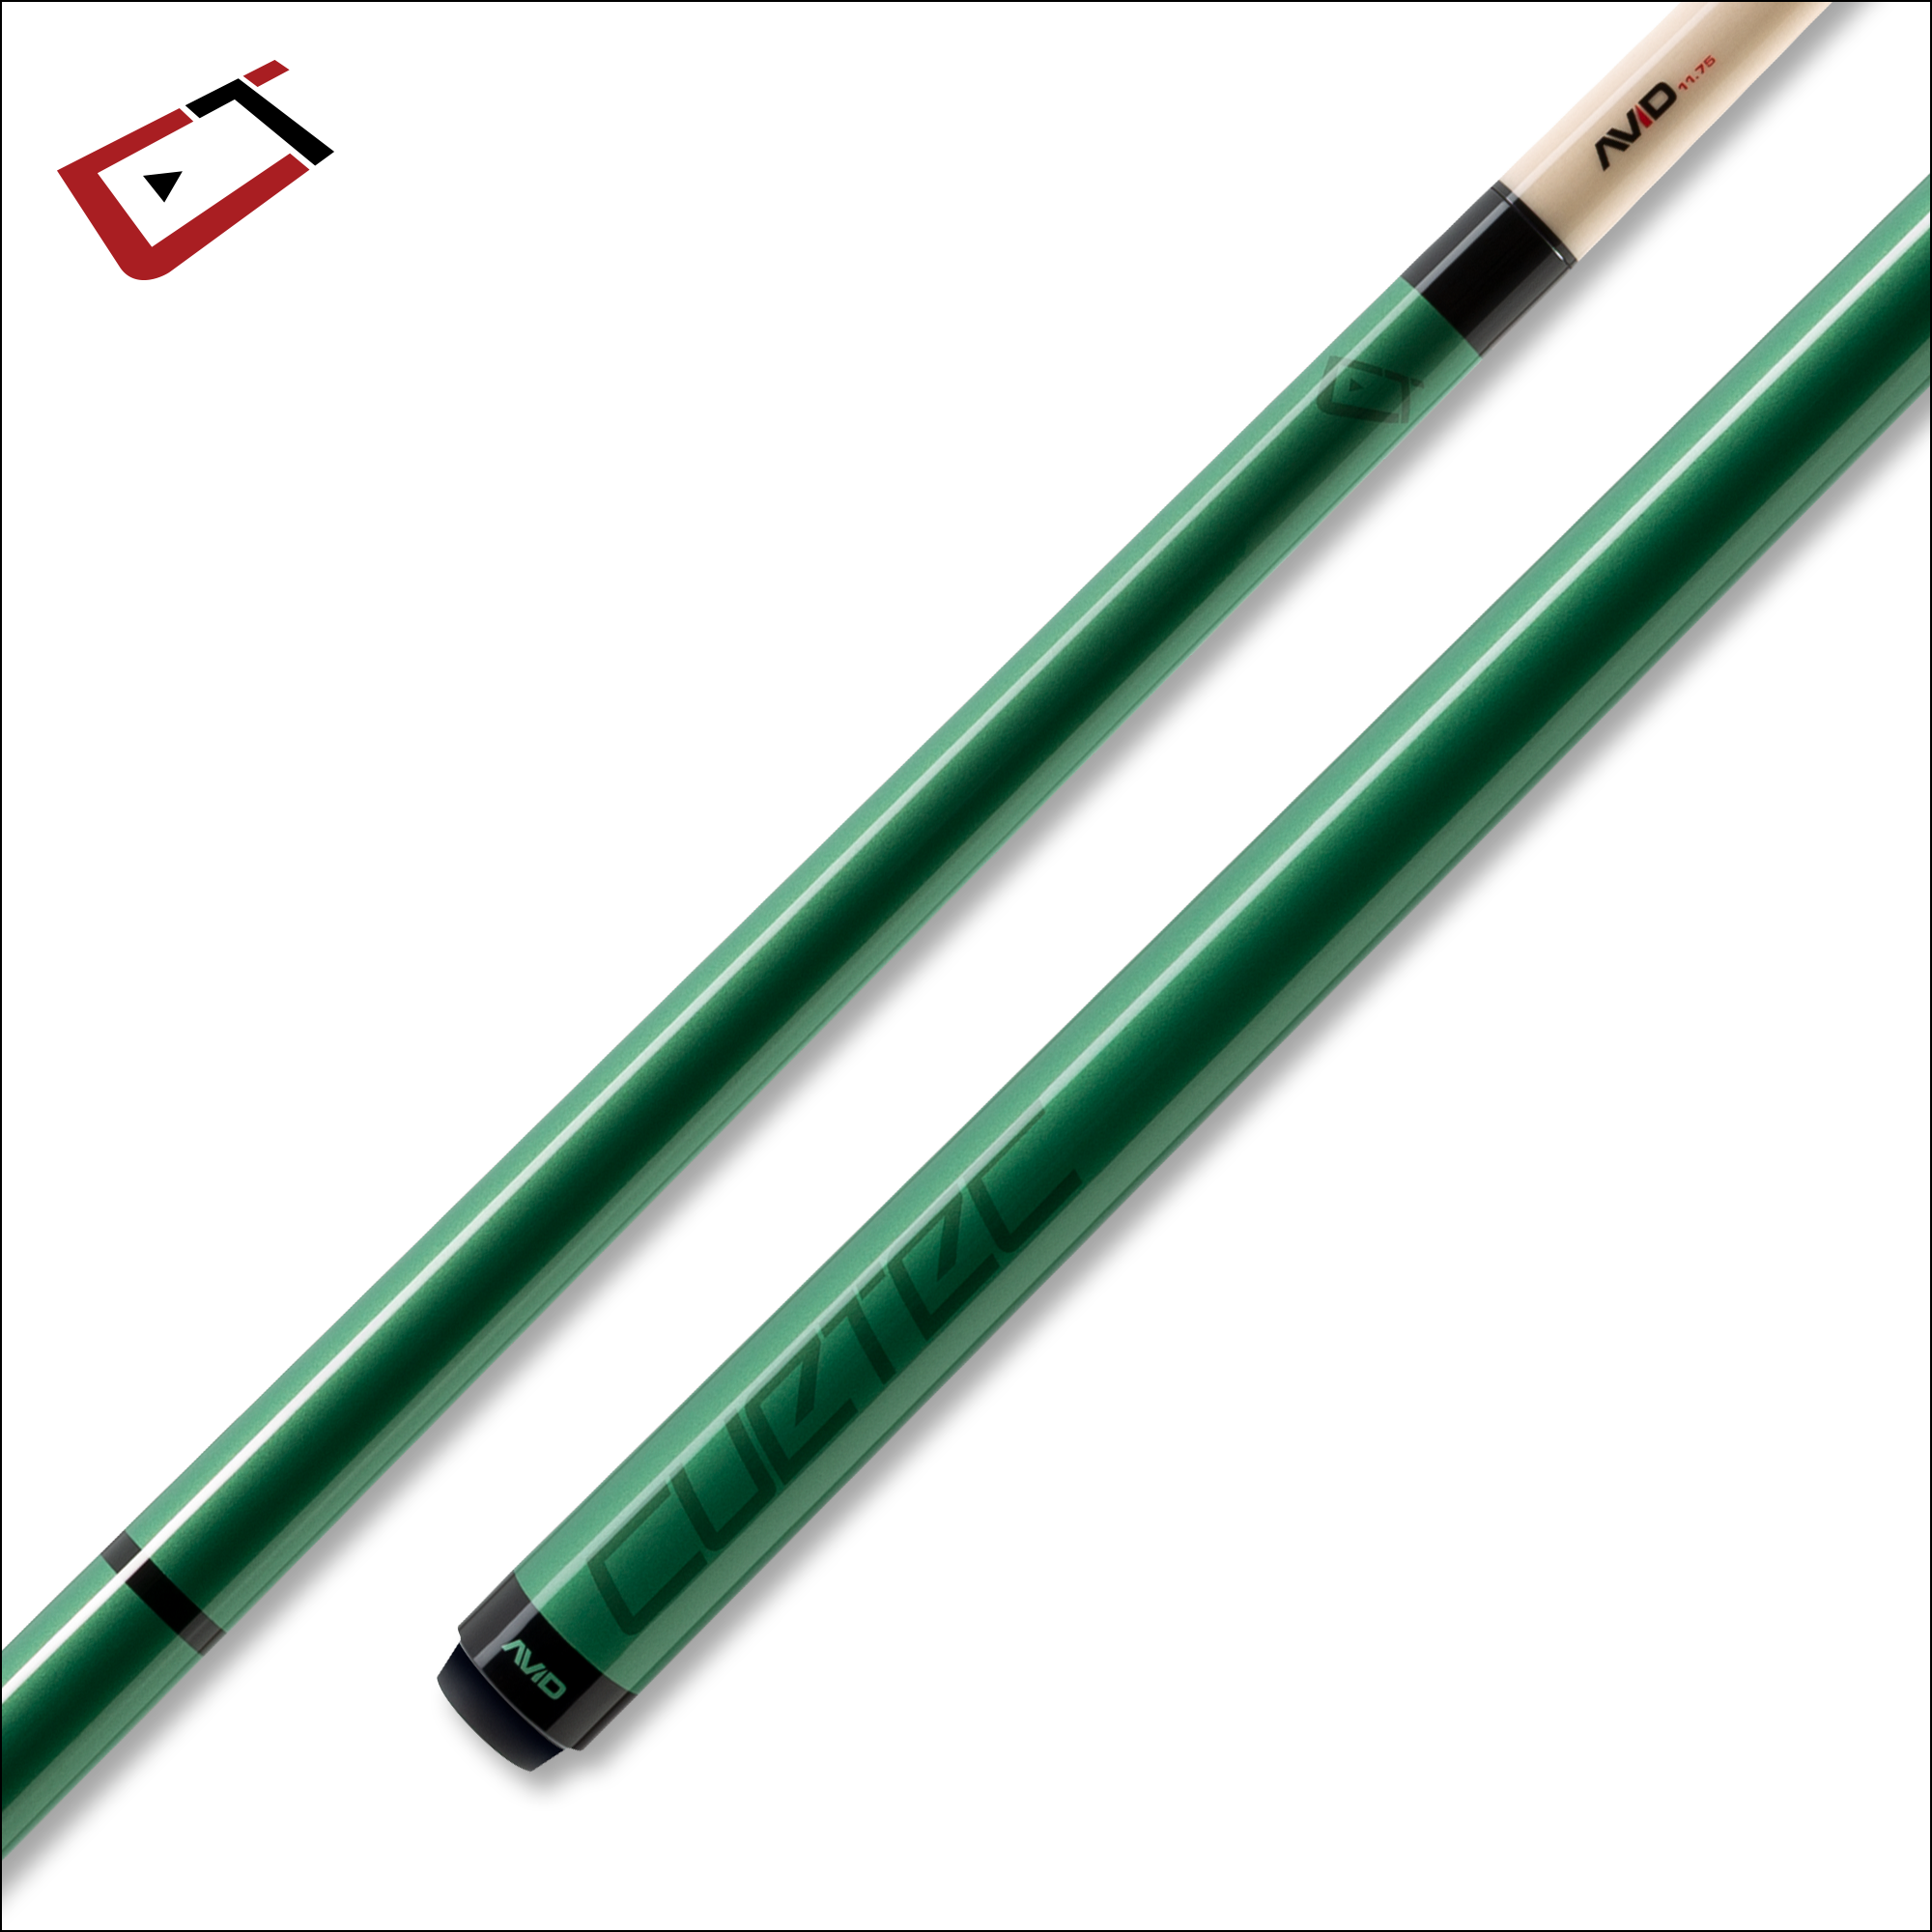 Shop for Cuetec Pool Cues and Products Online at Premier Billards